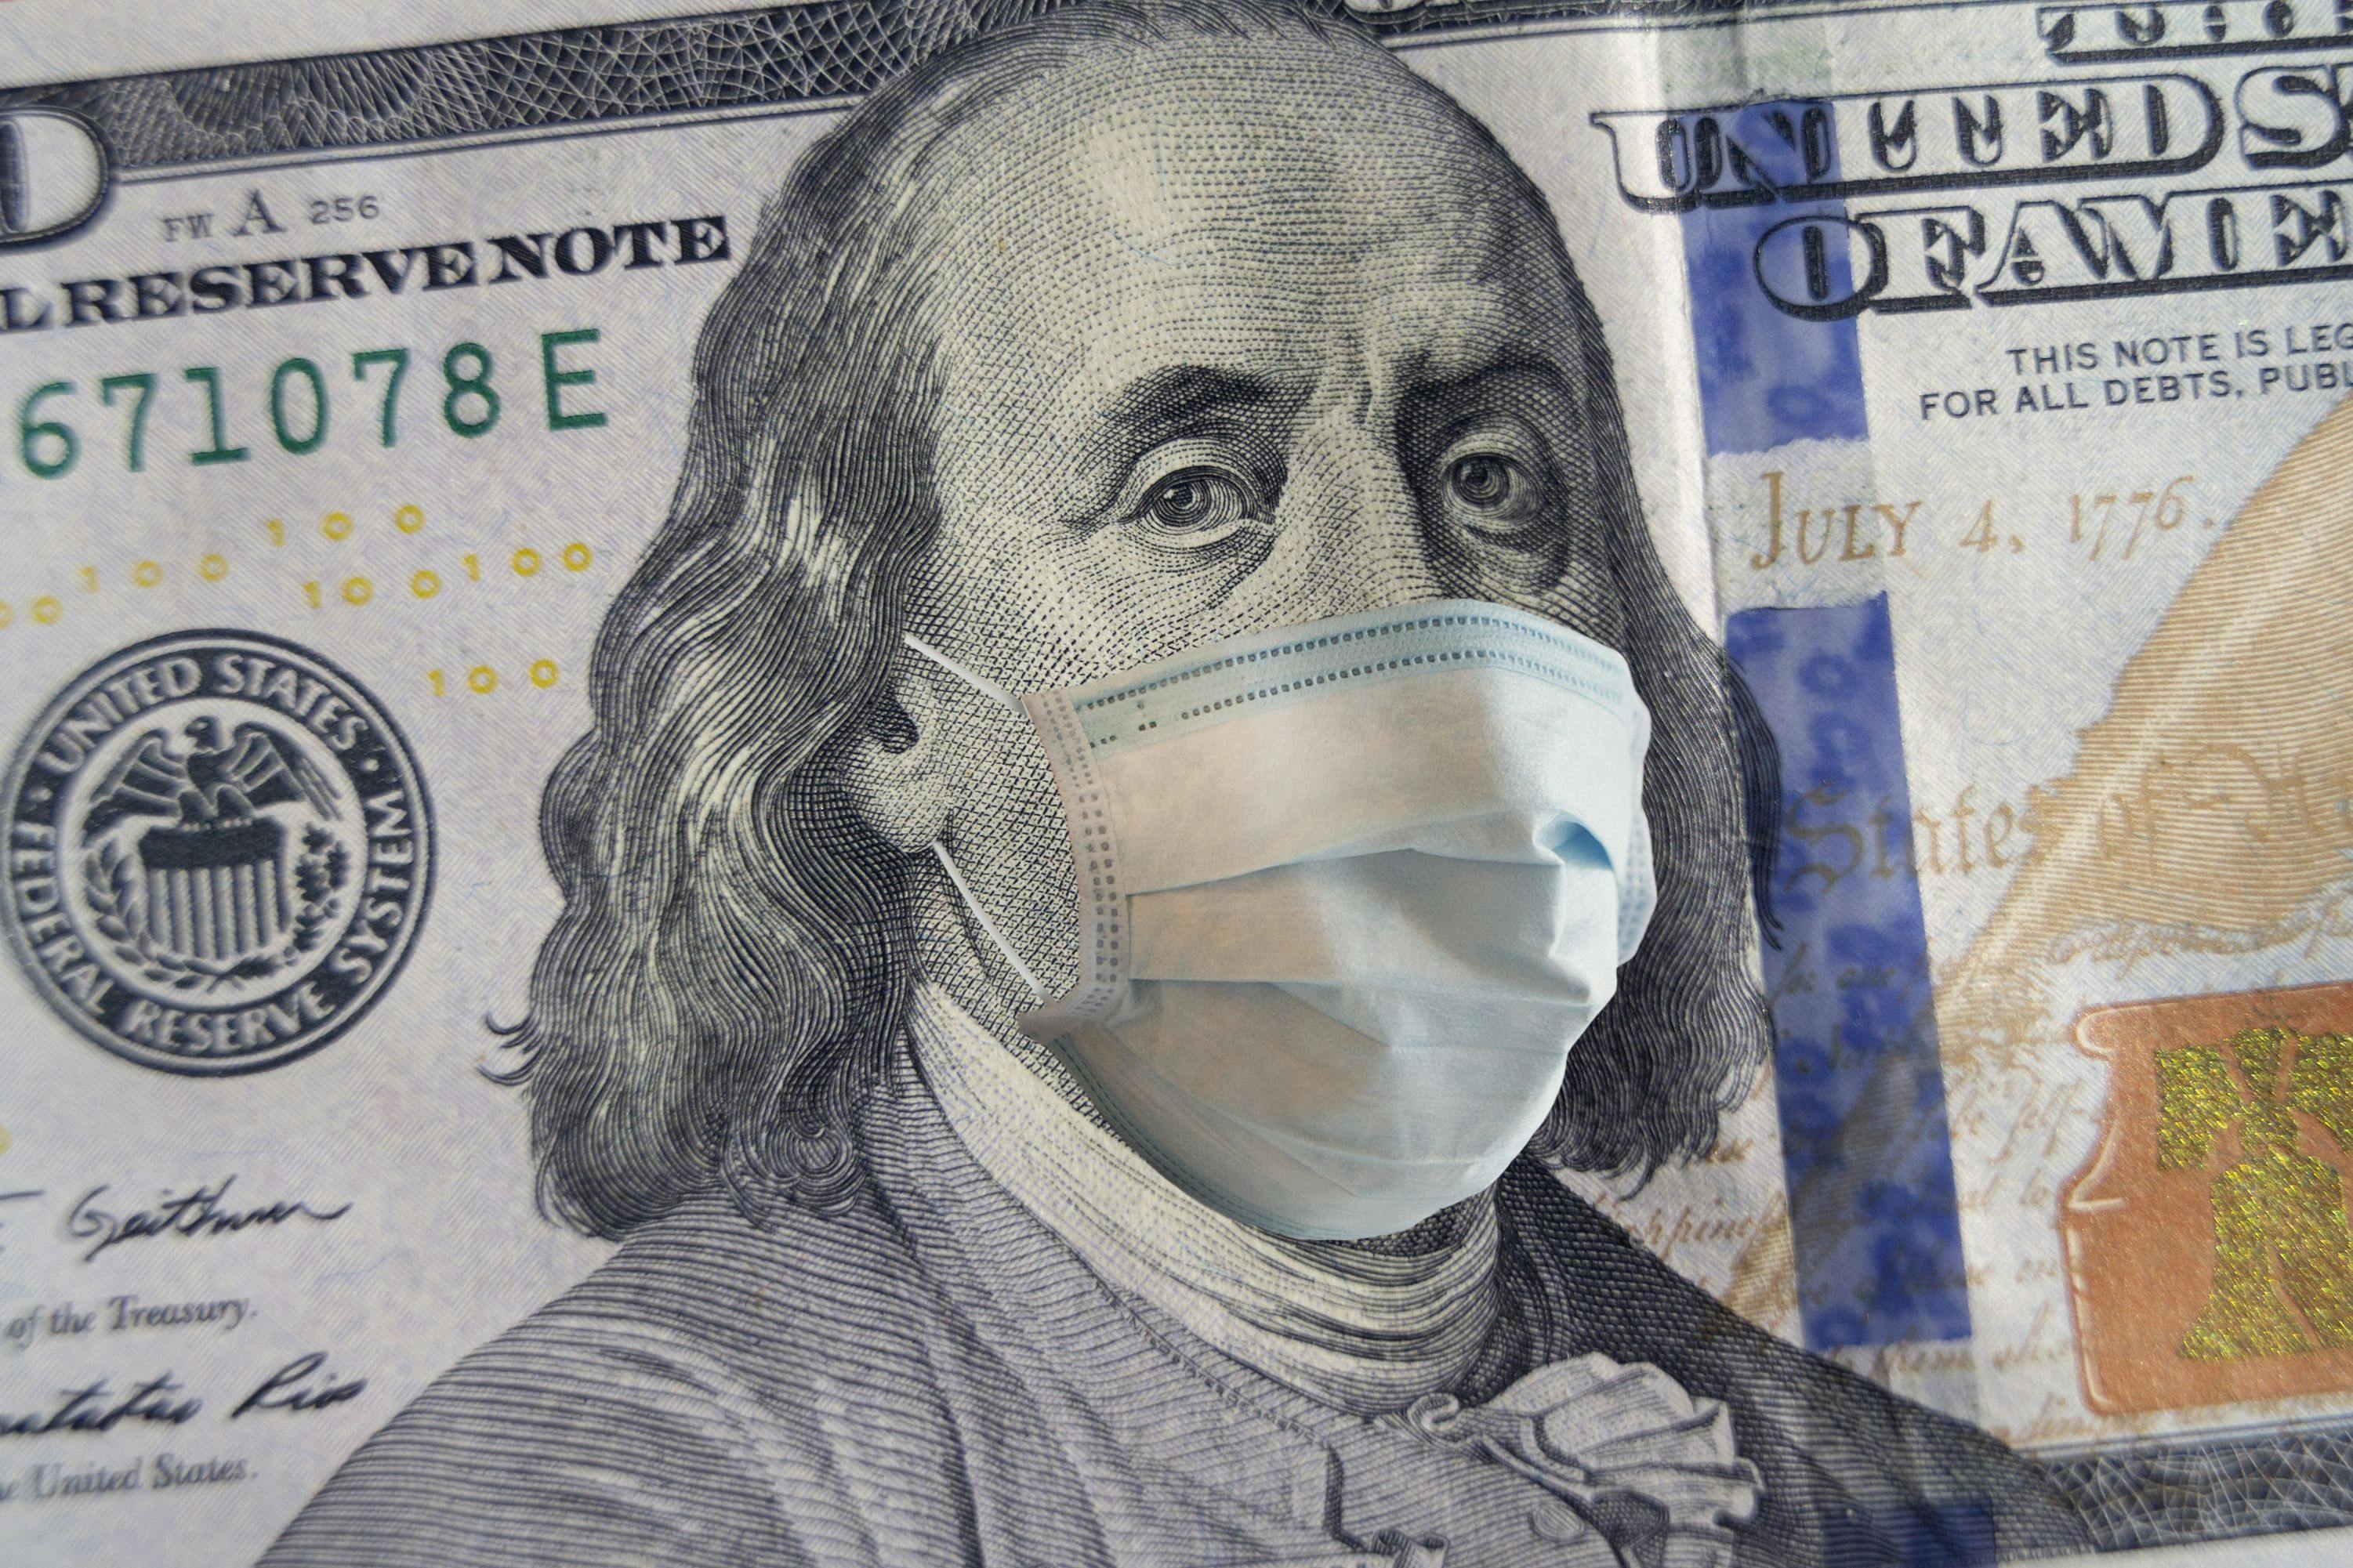 Hospitalizations for Unvaccinated Patients With COVID-19 Cost Billions